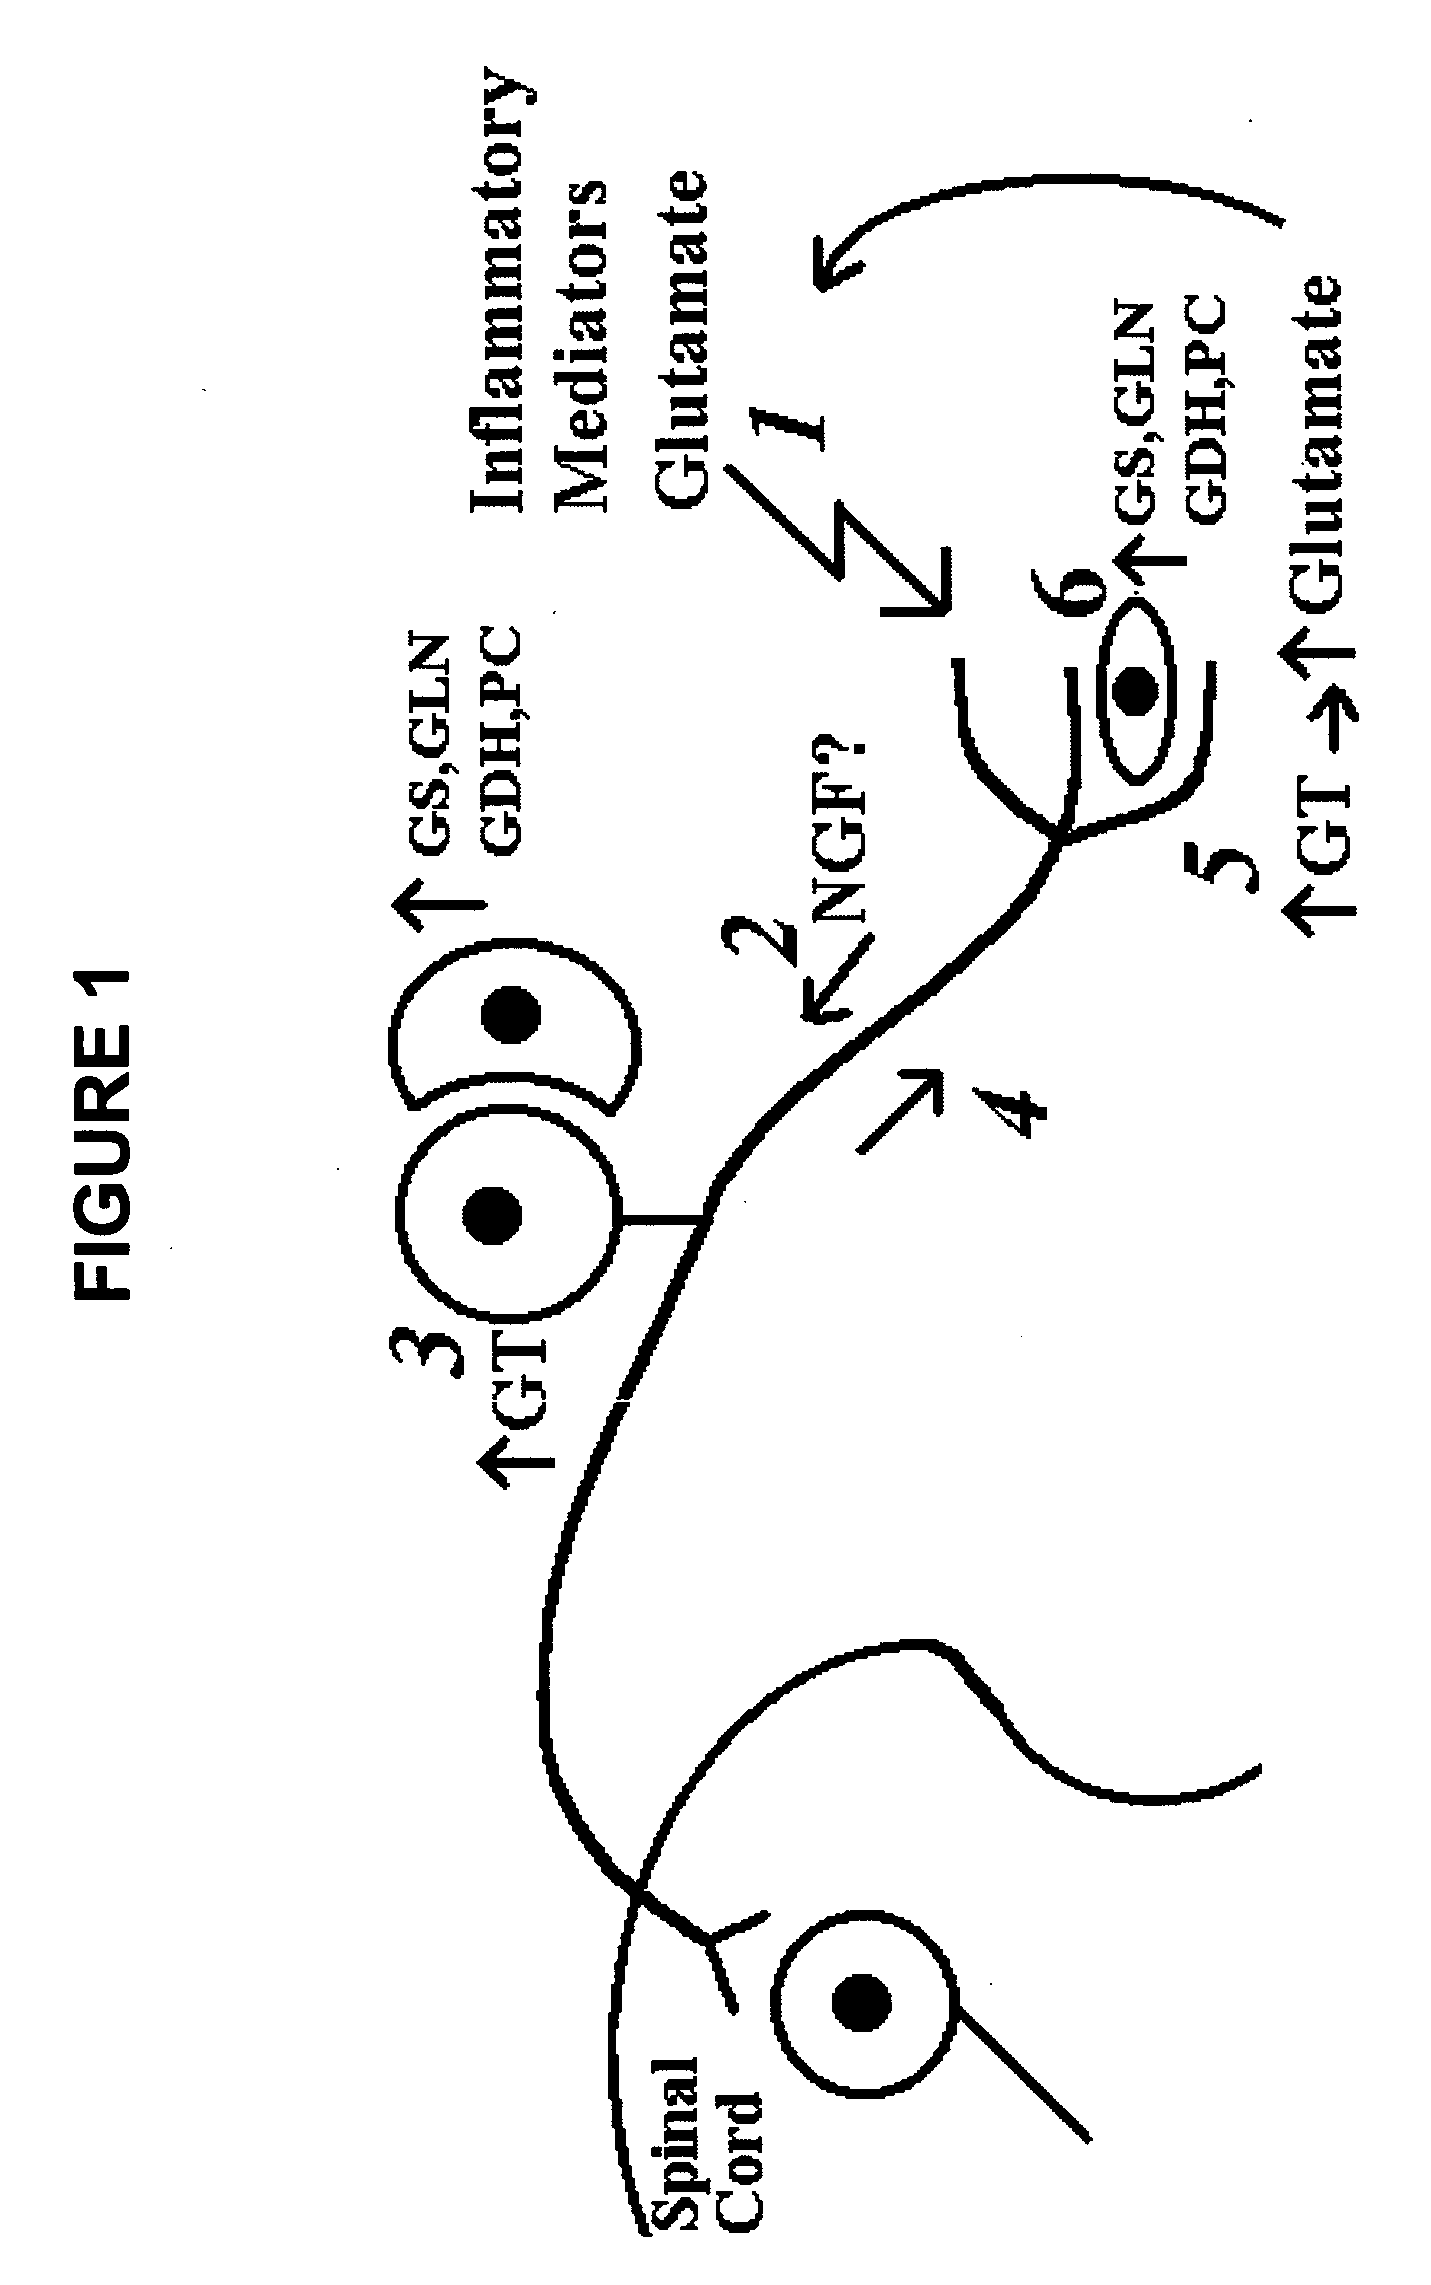 Method of alleviating chronic pain via peripheral inhibition of neurotransmitter synthesis